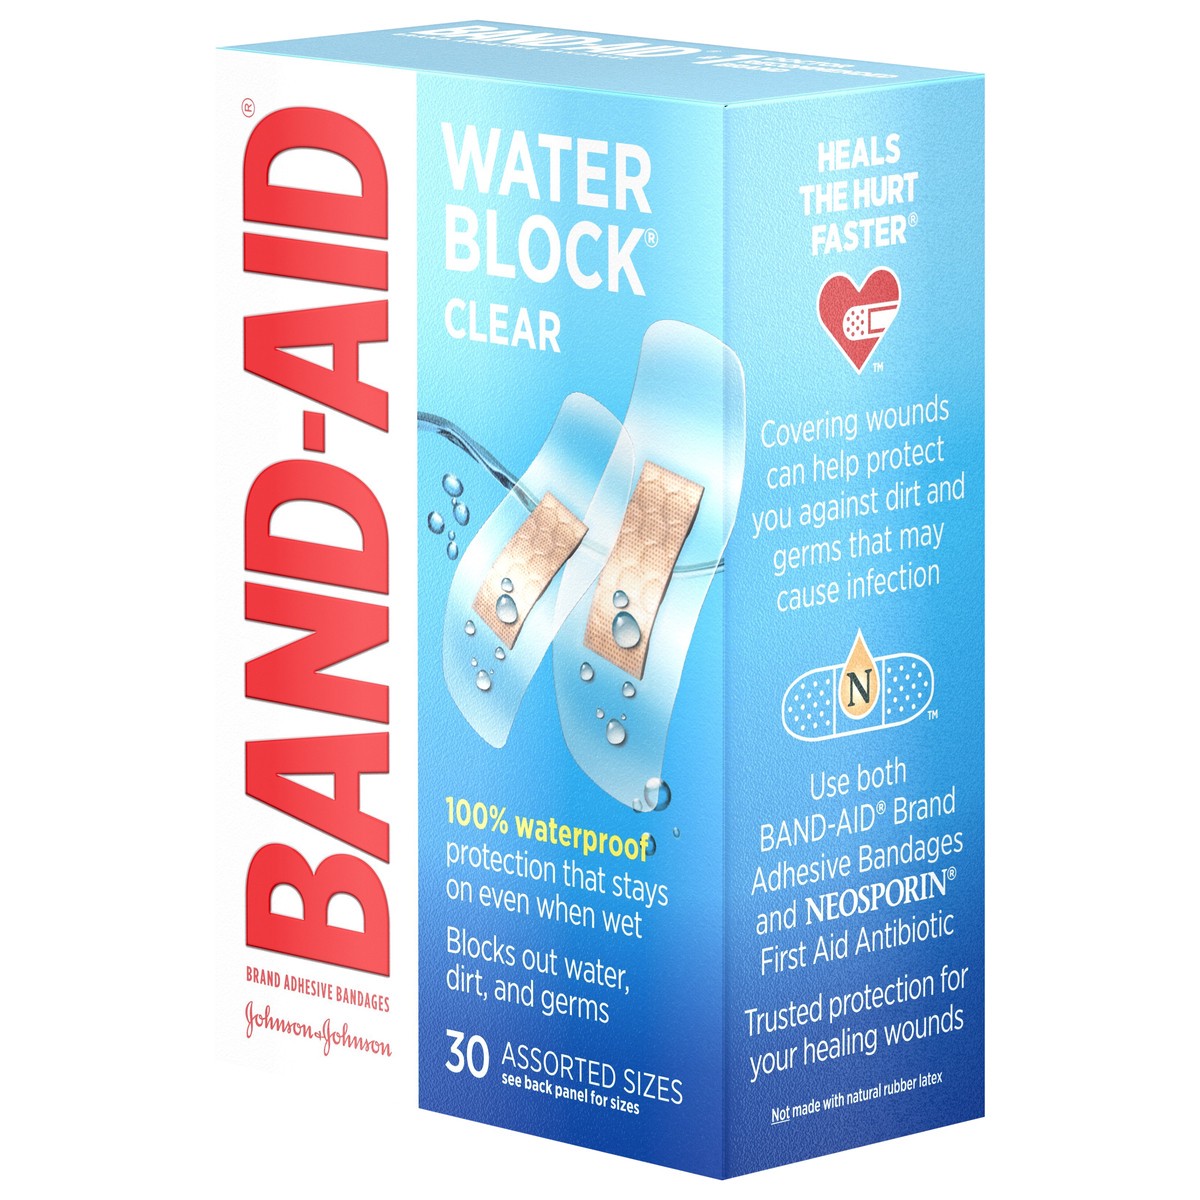 slide 2 of 8, BAND-AID Water Block Clear Waterproof Sterile Adhesive Bandages for First-Aid Care of Minor Wounds, Cuts, Scrapes & Burns, Quilt-Aid Pad to Cushion Wounds, Assorted Sizes, 30 ct, 30 ct